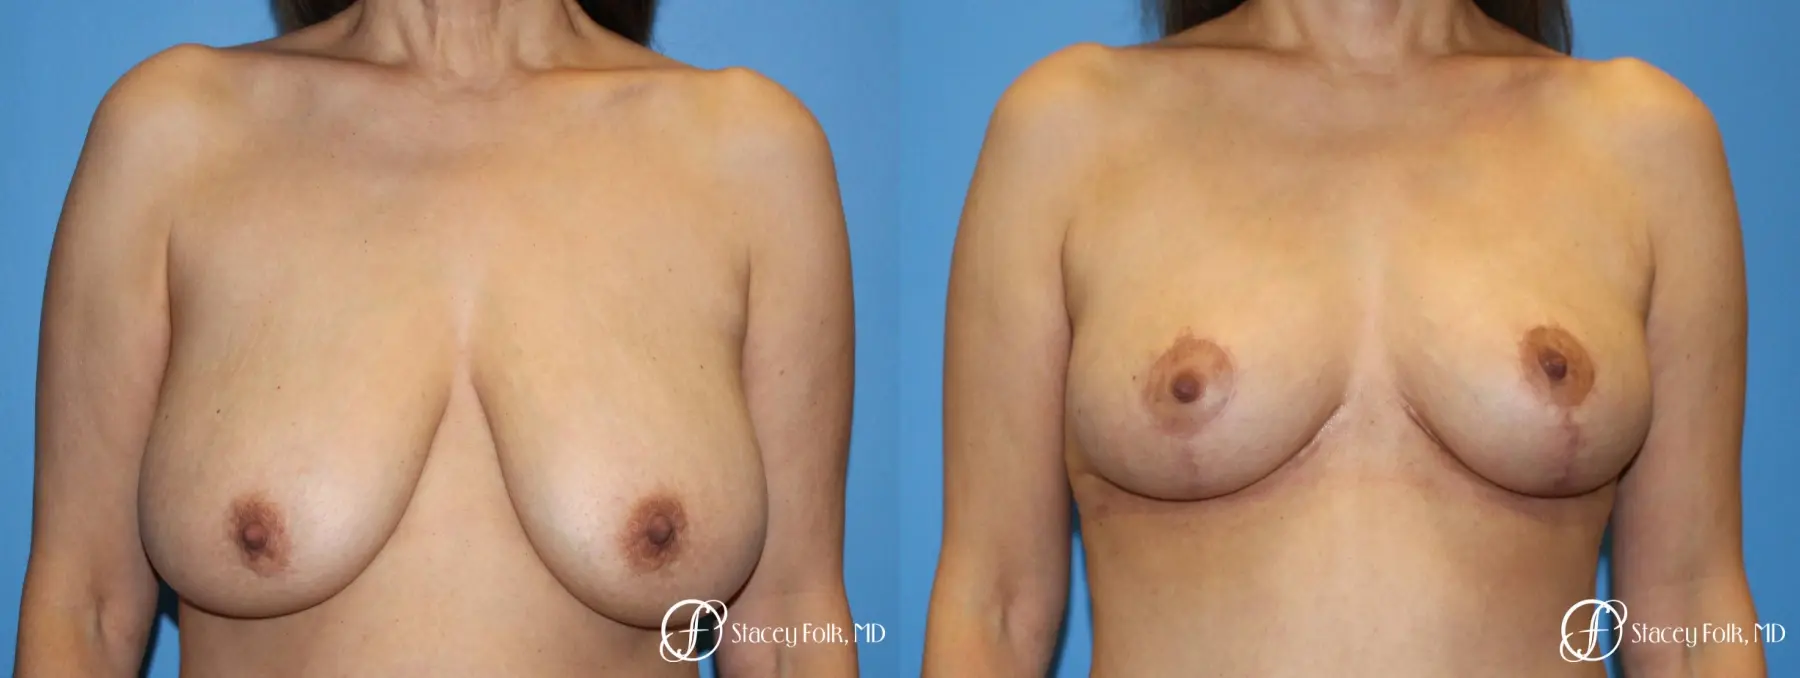 Denver Breast Lift - Mastopexy 7984 - Before and After 1